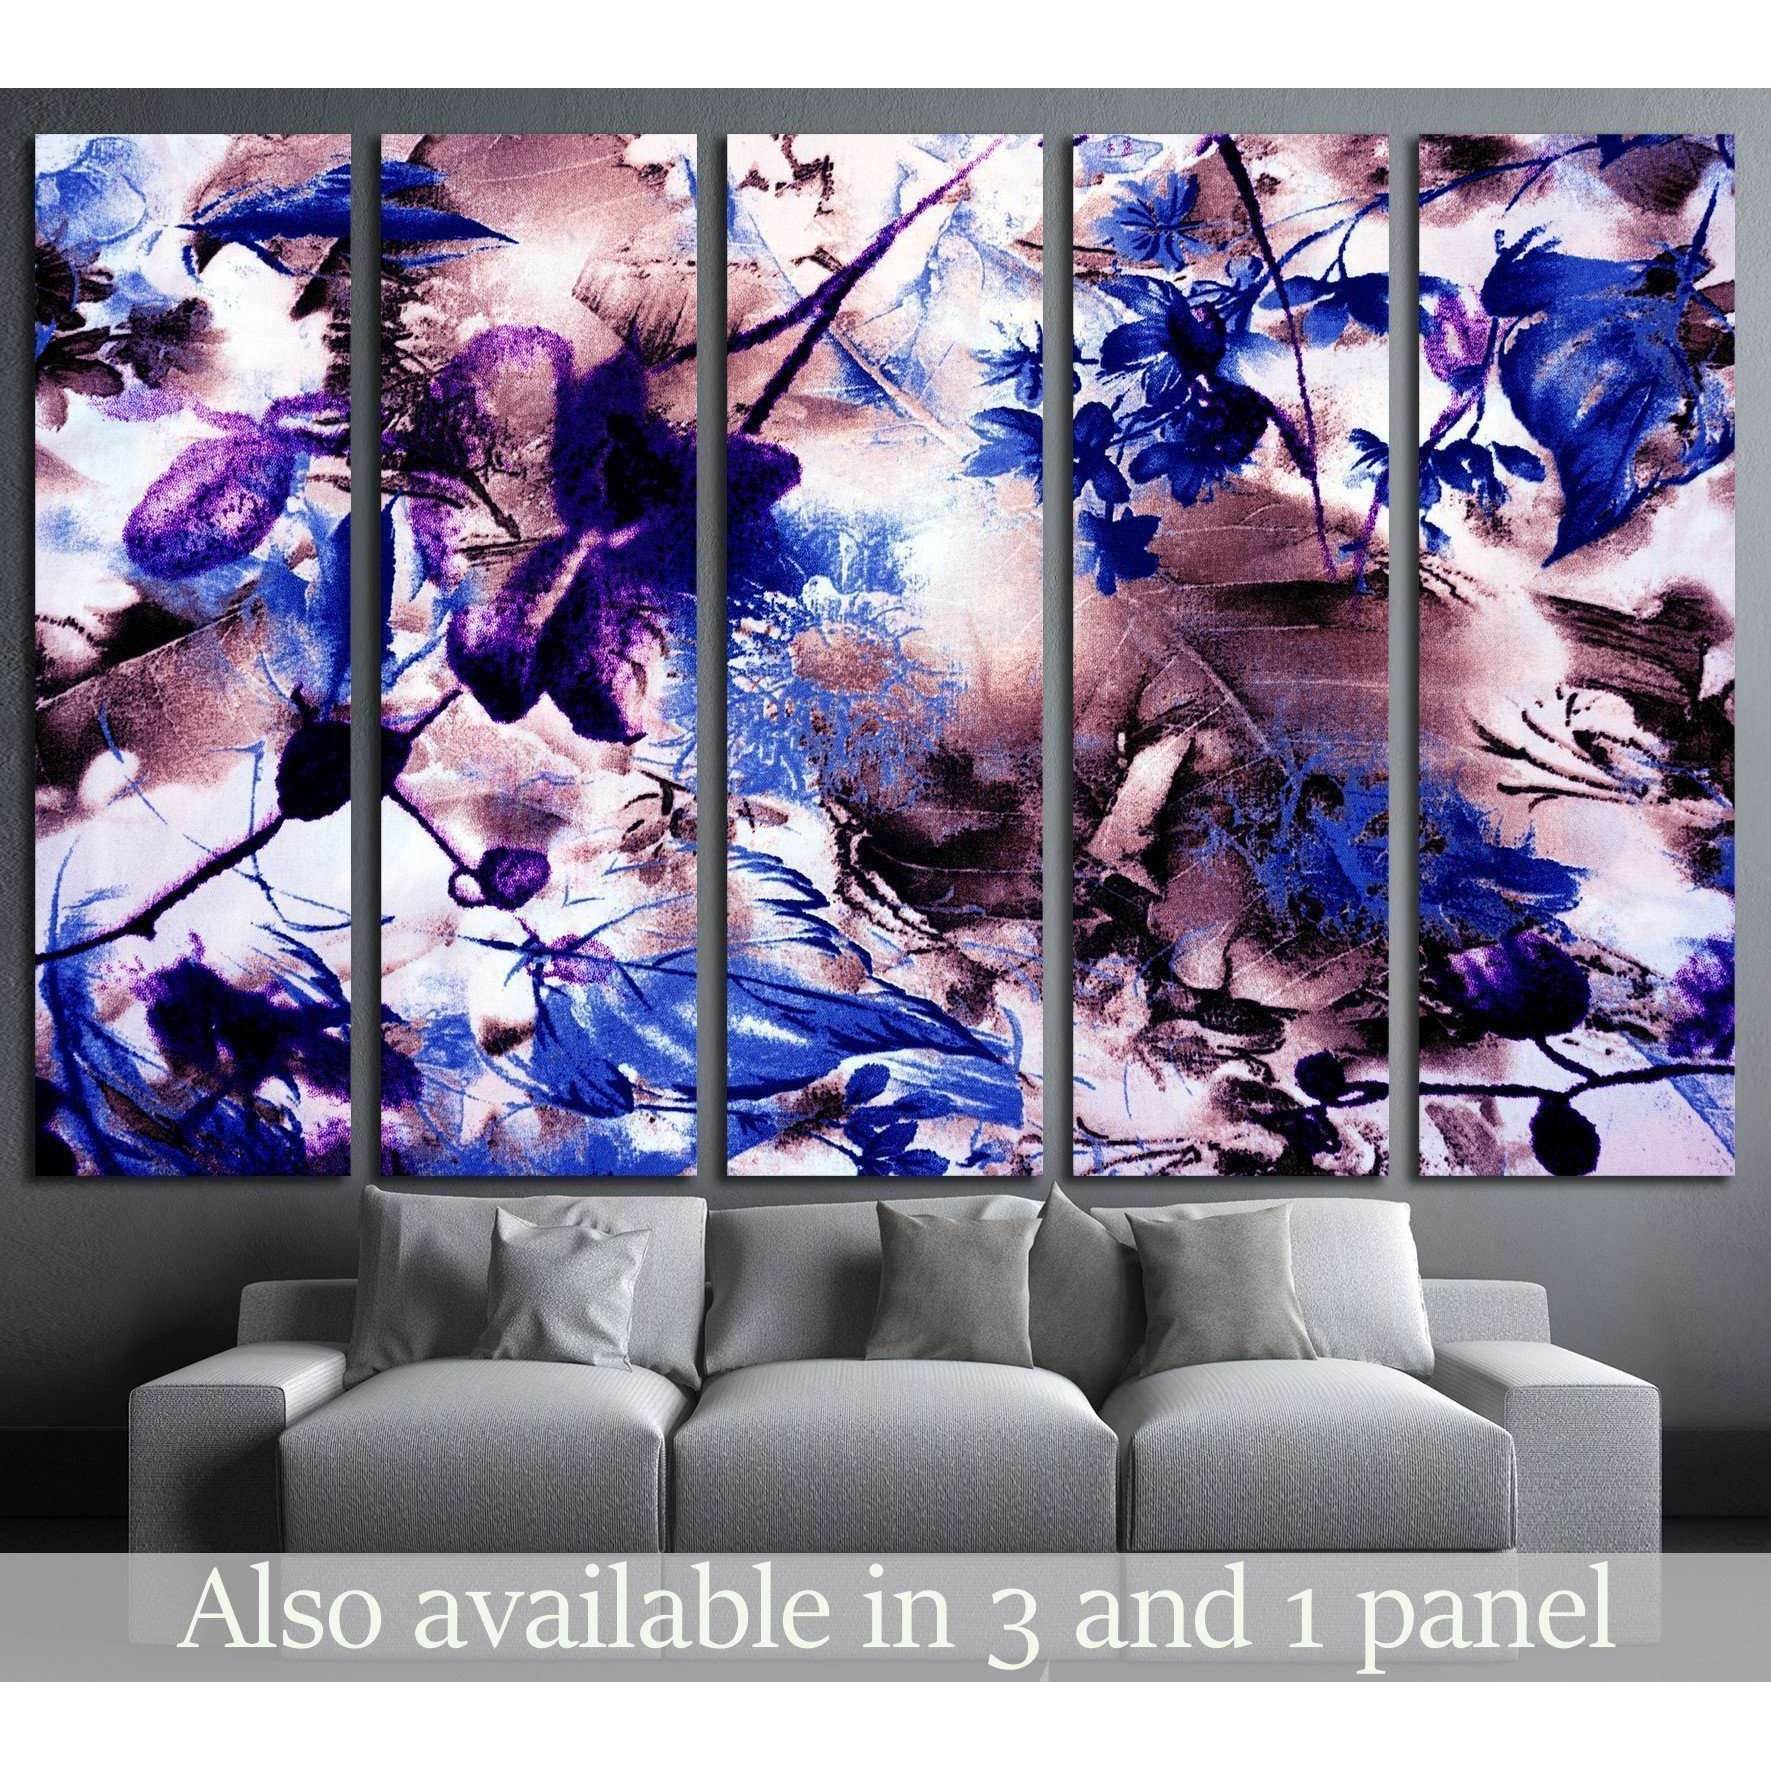 patterned cloth №1343 Ready to Hang Canvas Print